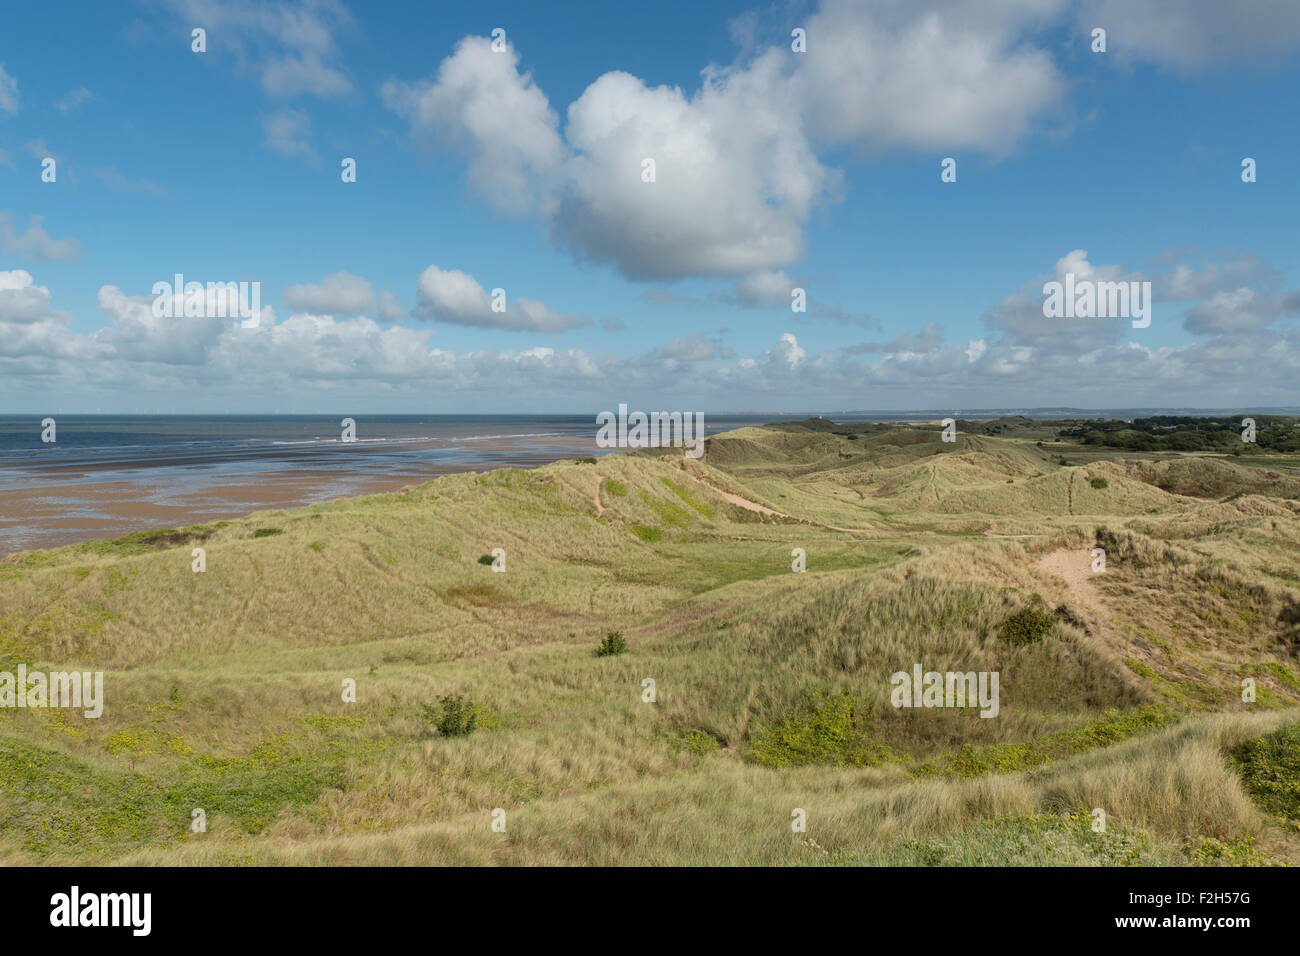 The wildlife conservation site at Gronant dunes in Flintshire, close to Prestatyn in Denbighshire. Stock Photo